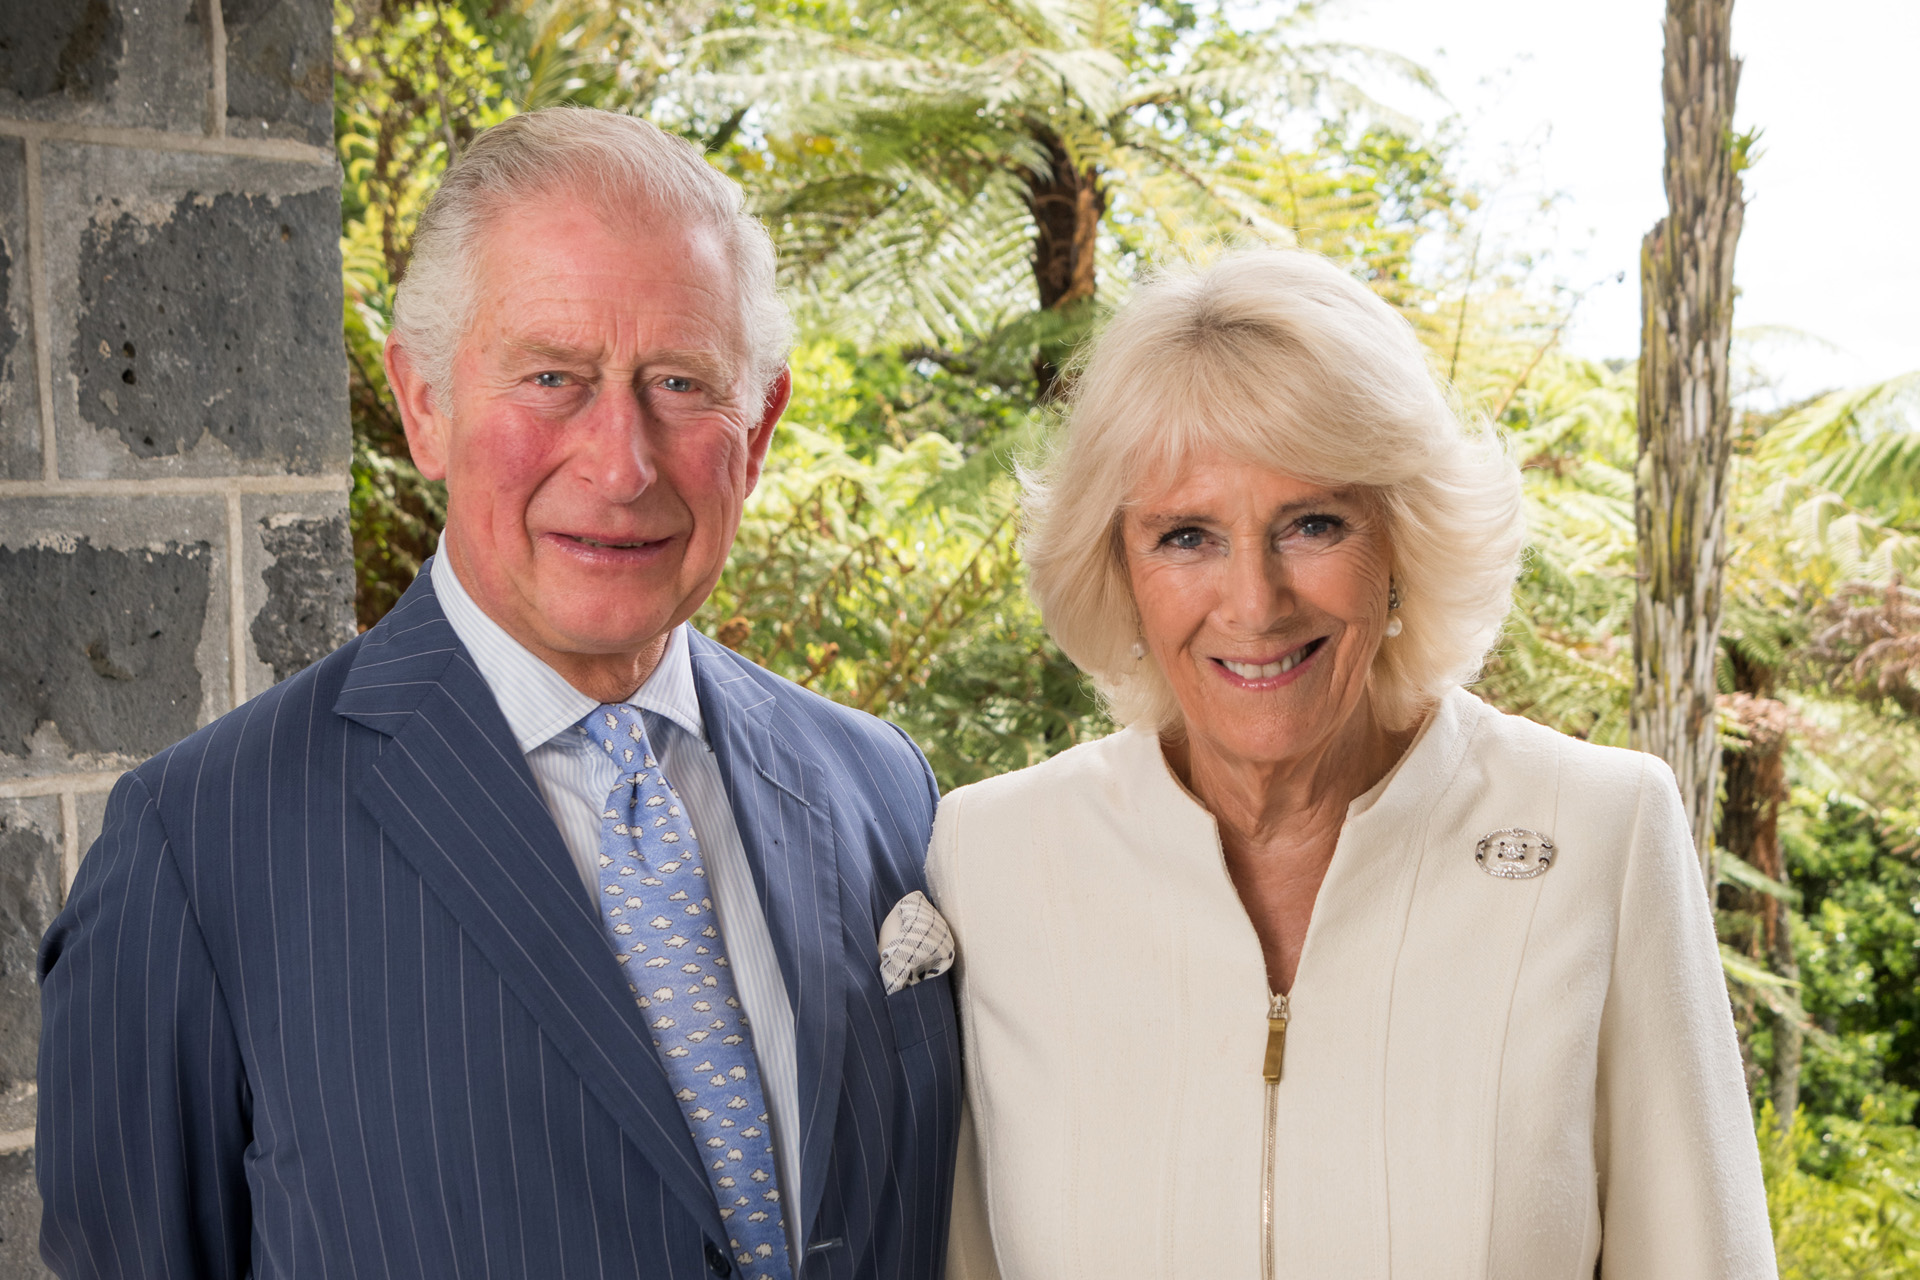 Official Portraits for the Prince of Wales and the Duchess of Cornwall November 18, 2019 AUCKLAND, New Zealand.